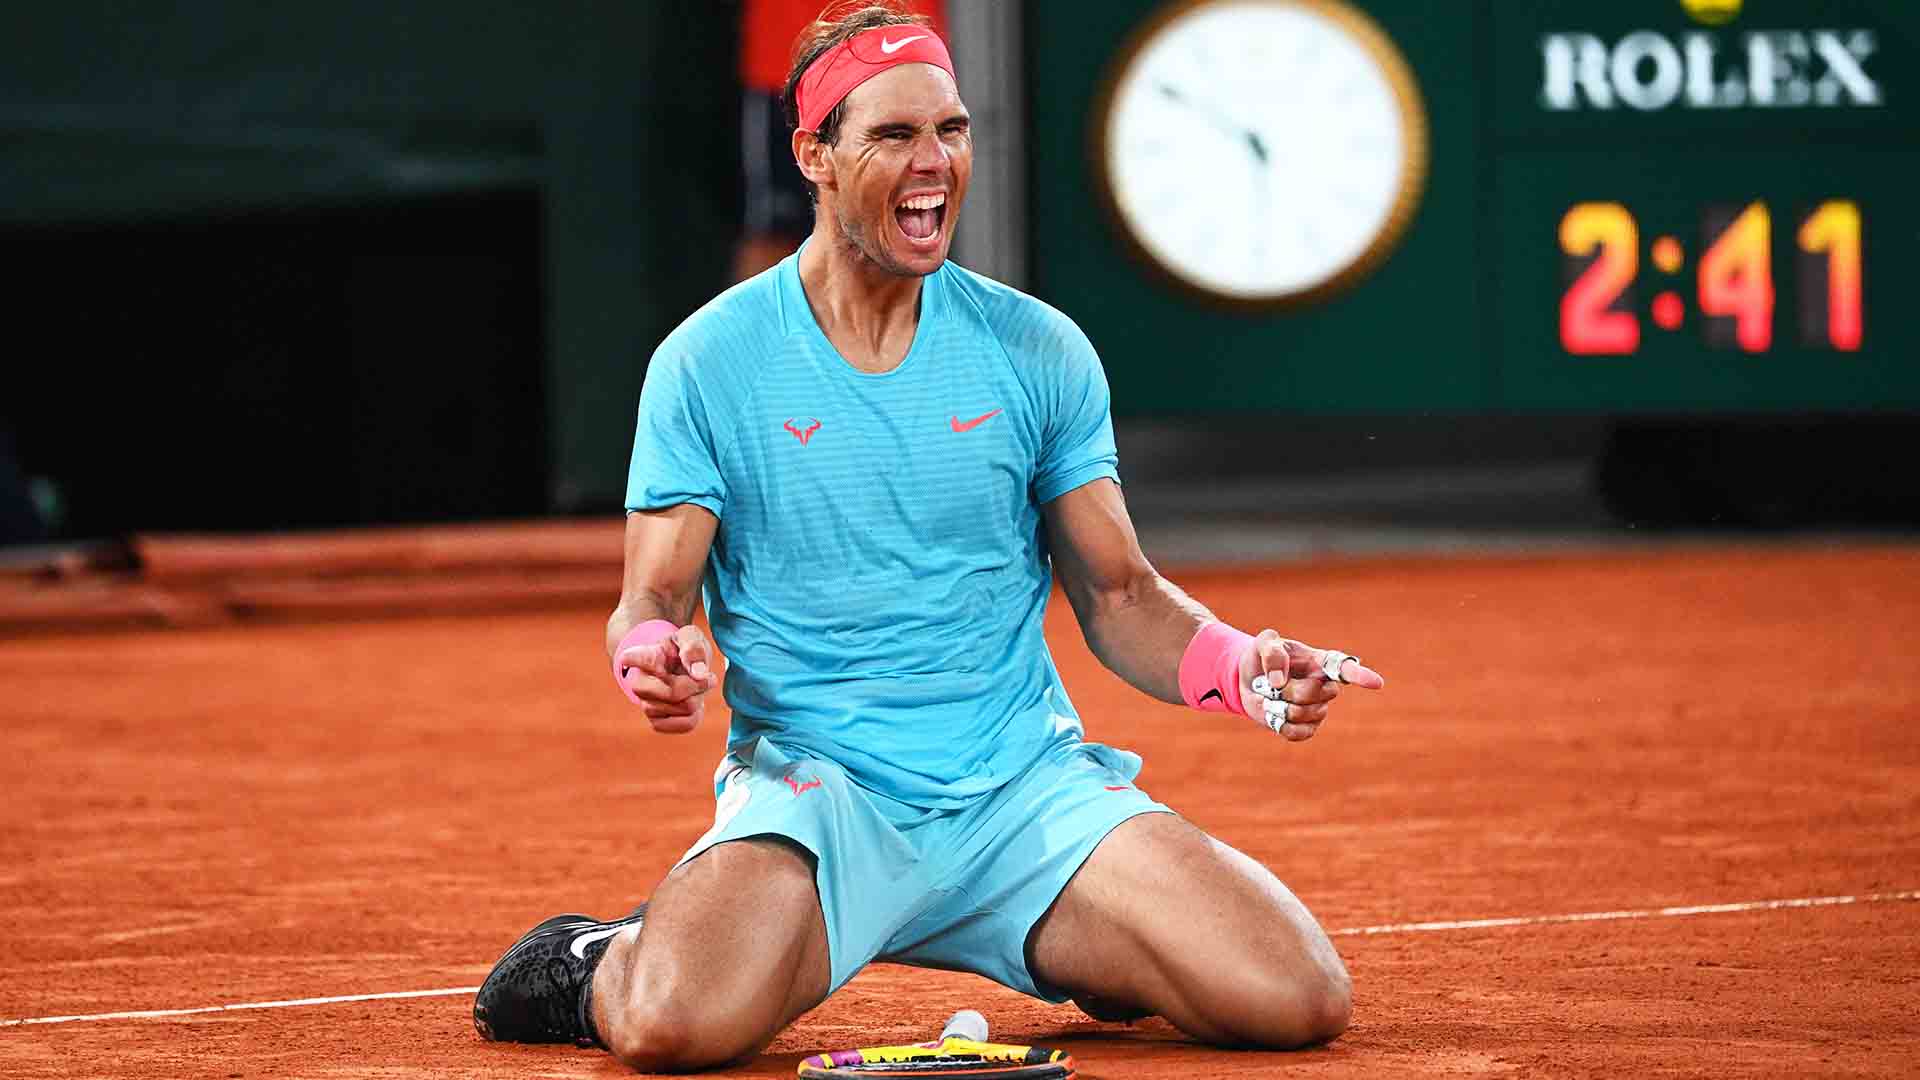 Rafael Nadal On The Greatest Debate Analyse It When Our Careers Are Over Atp Tour Tennis